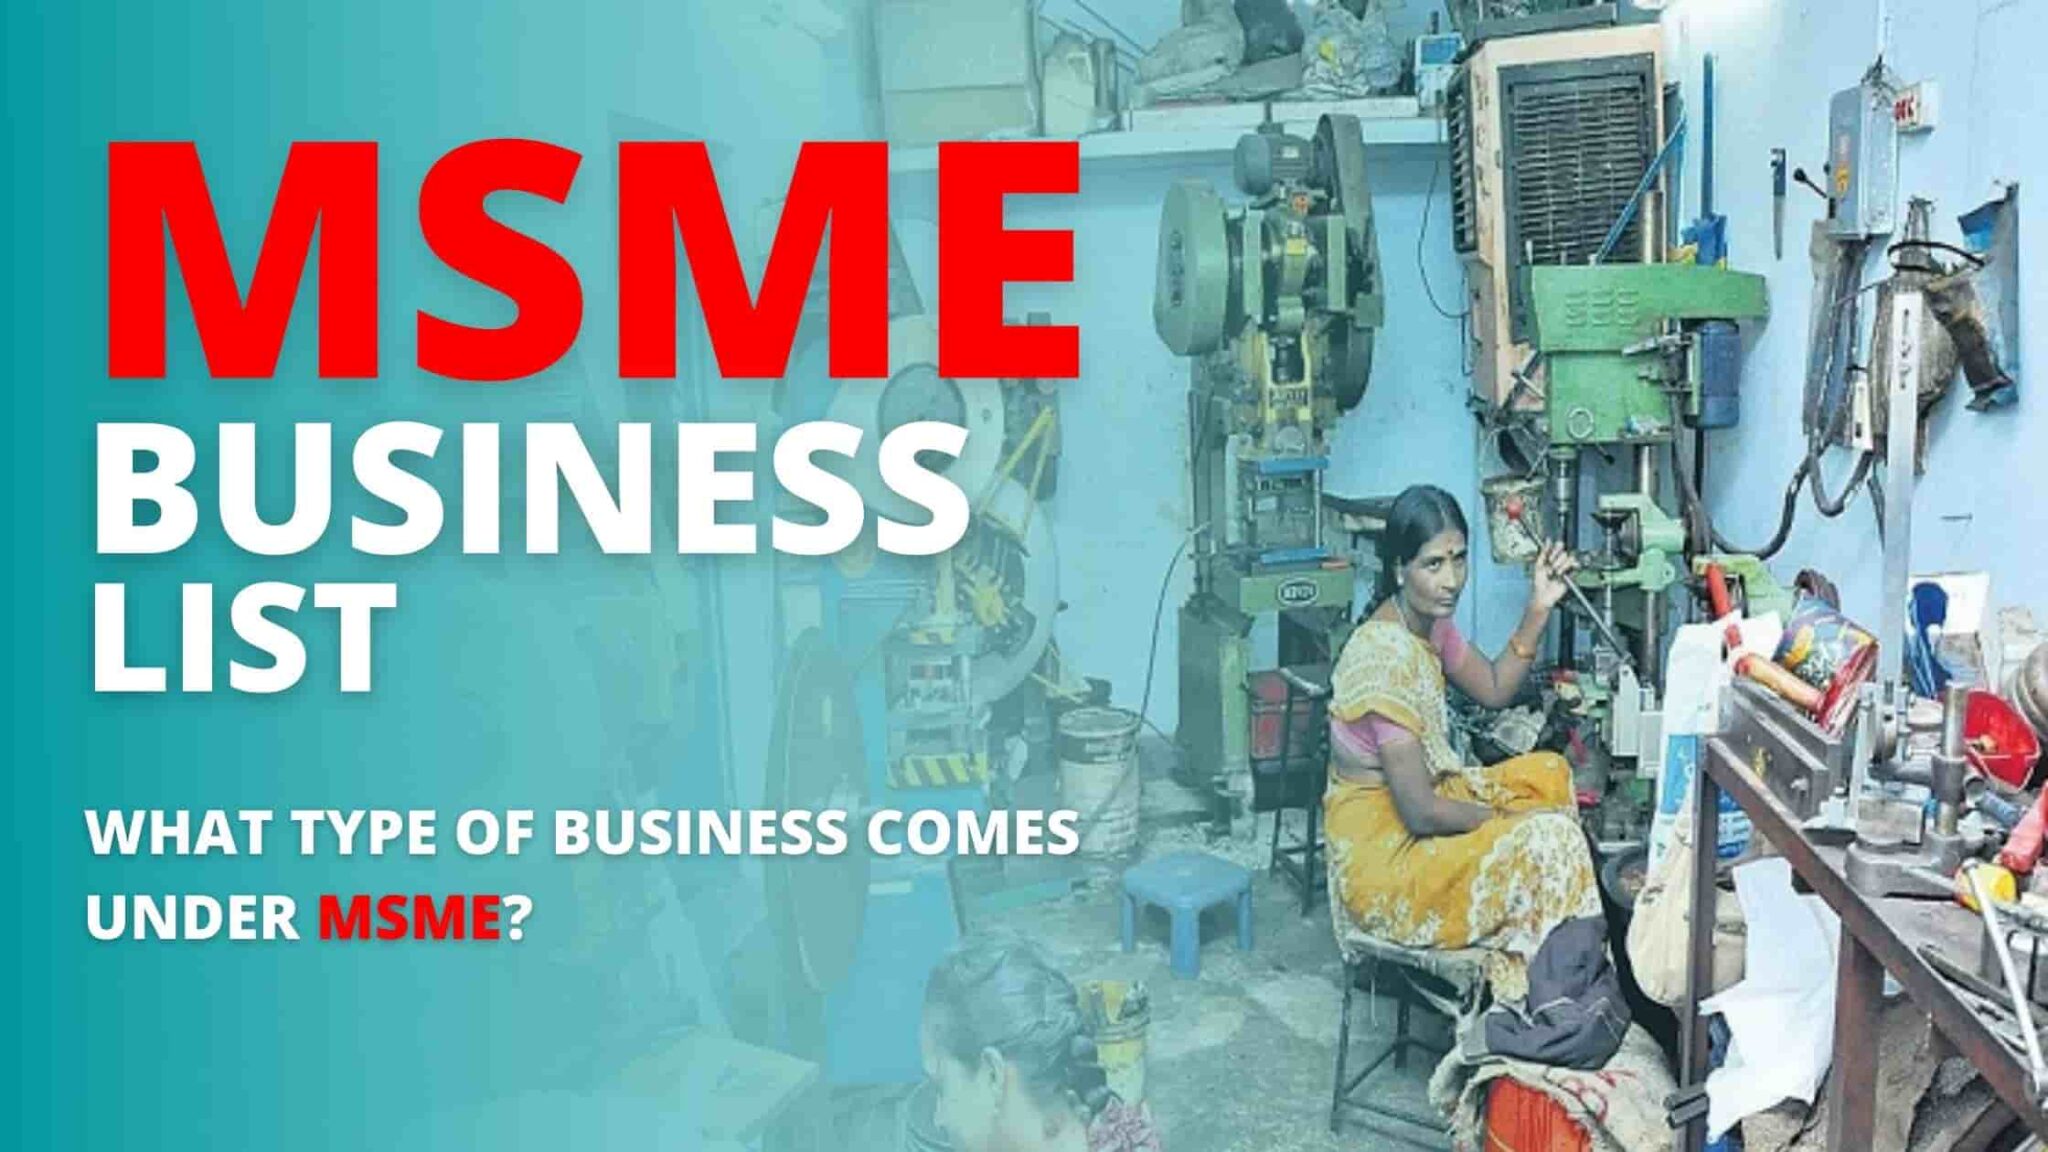 MSME Business List – What type of business comes under MSME